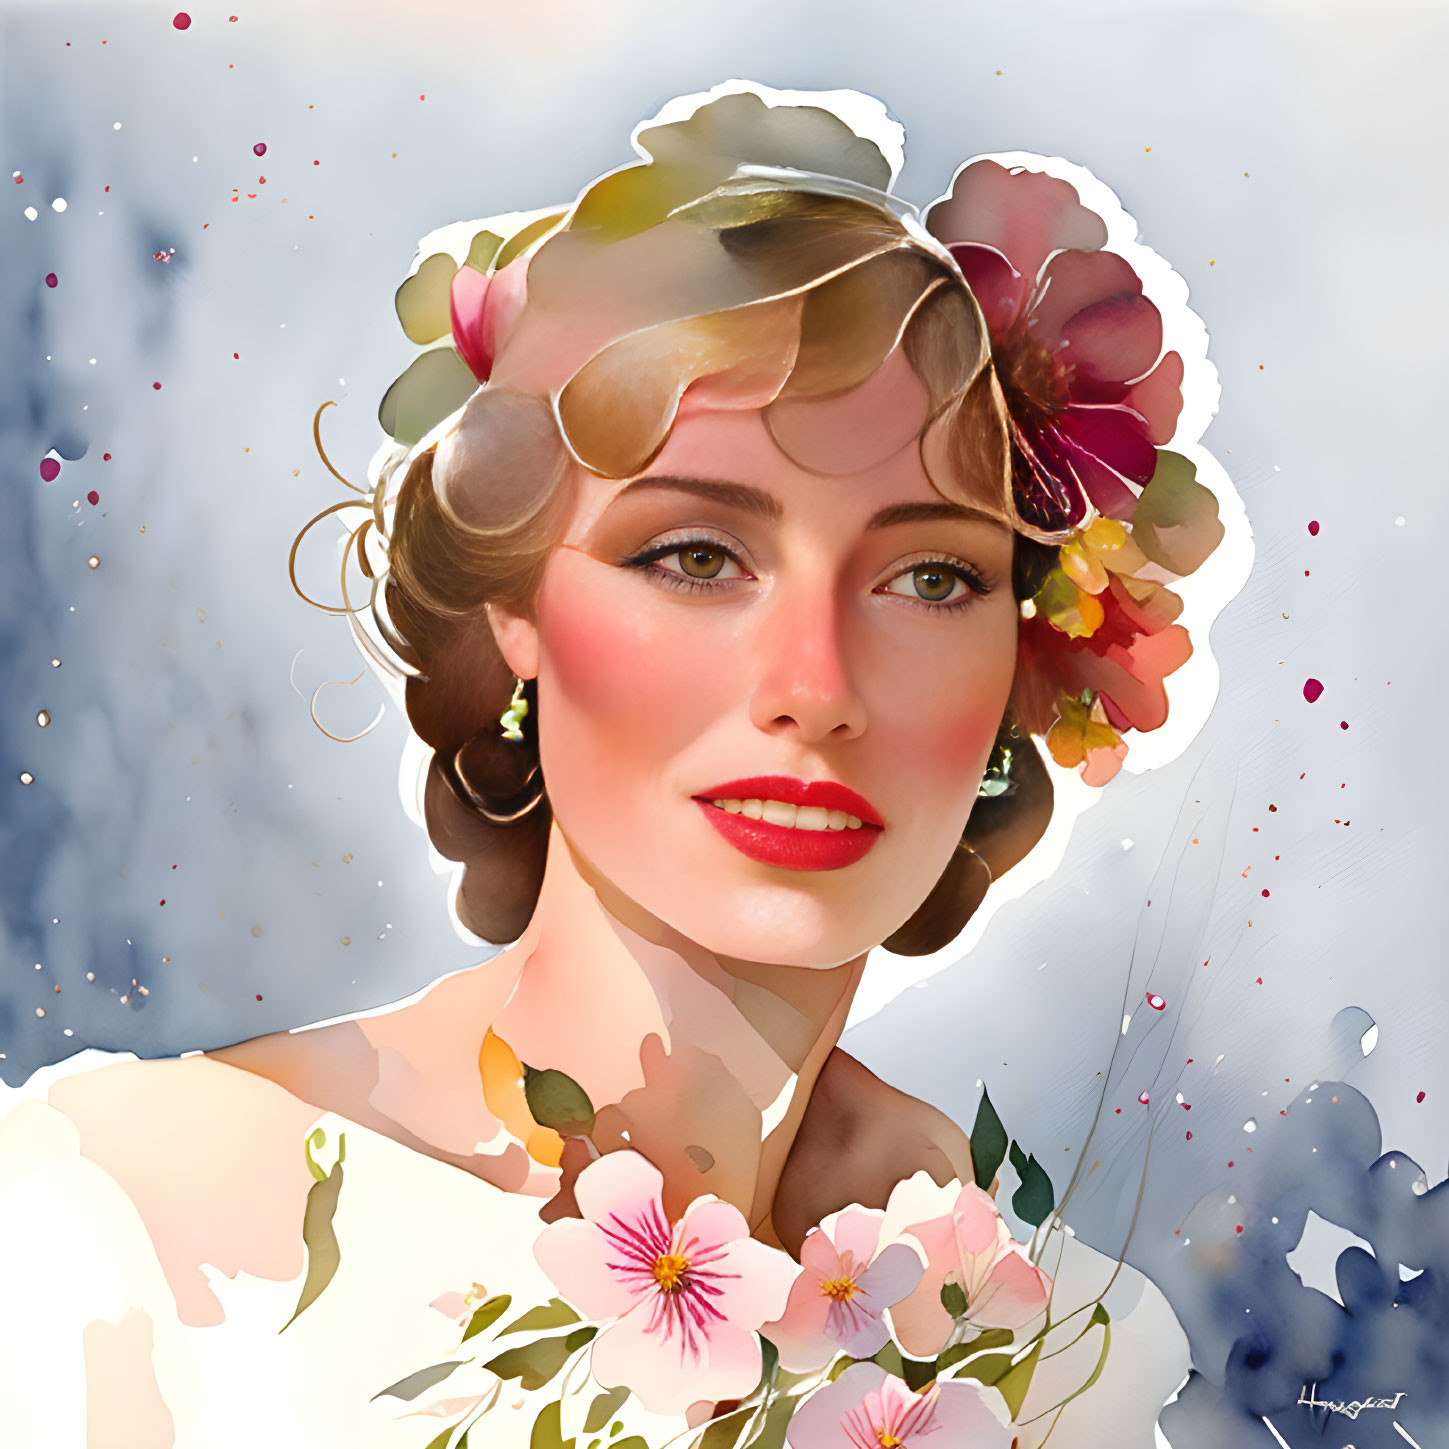 Stylized portrait of a woman with 1920s hairstyle and floral accents